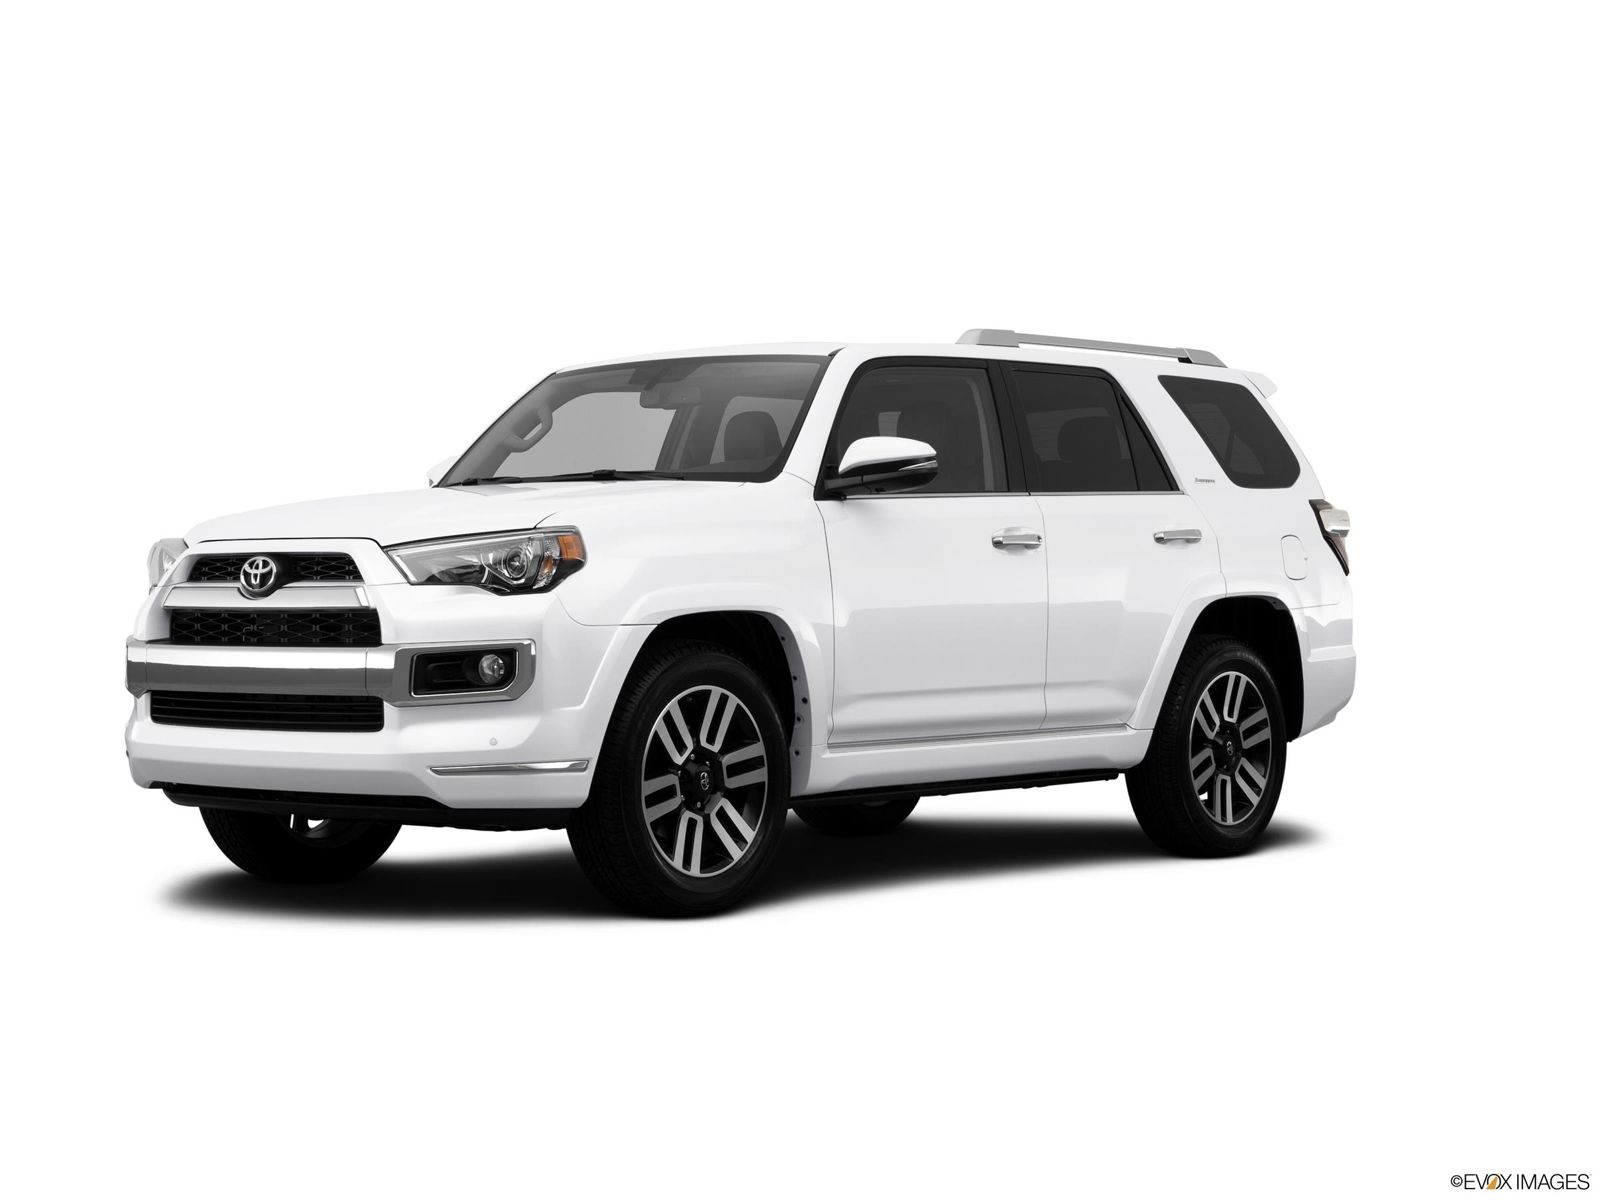 2014 Toyota 4Runner Research, Photos, Specs and Expertise | CarMax